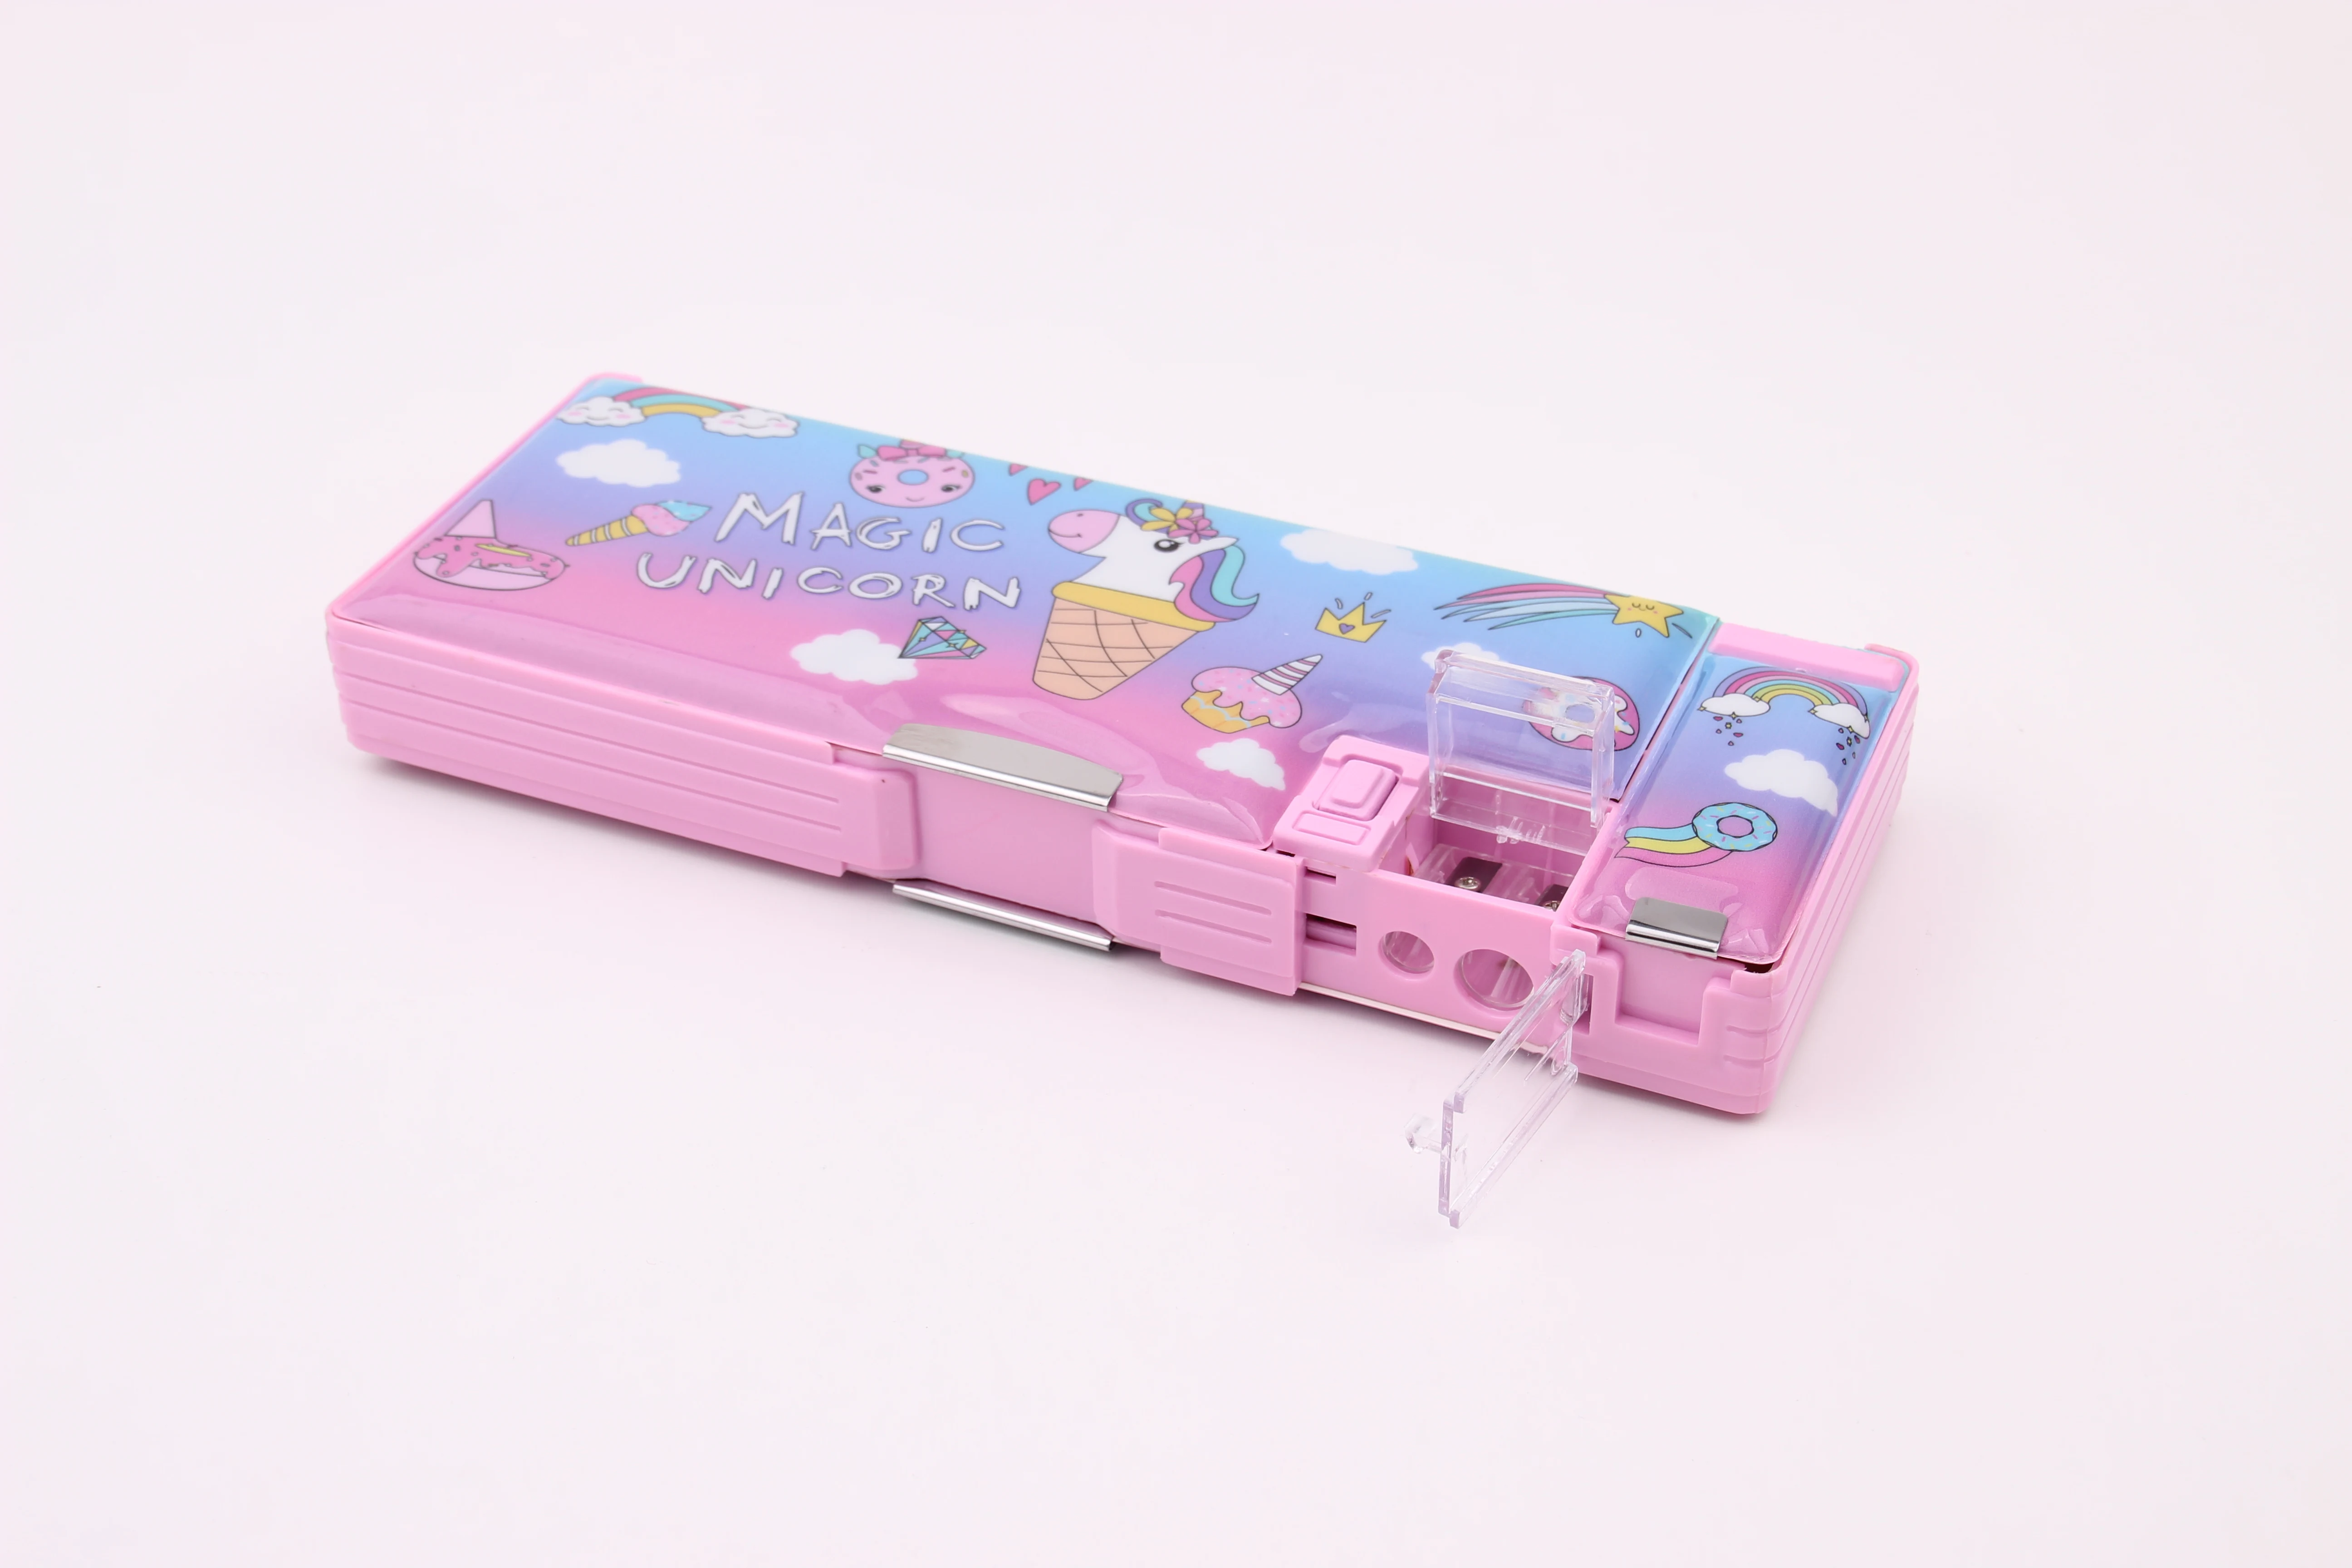 Interwell Hot Selling Fashion Stationary Kids Personalized large pink pencil case aesthetic